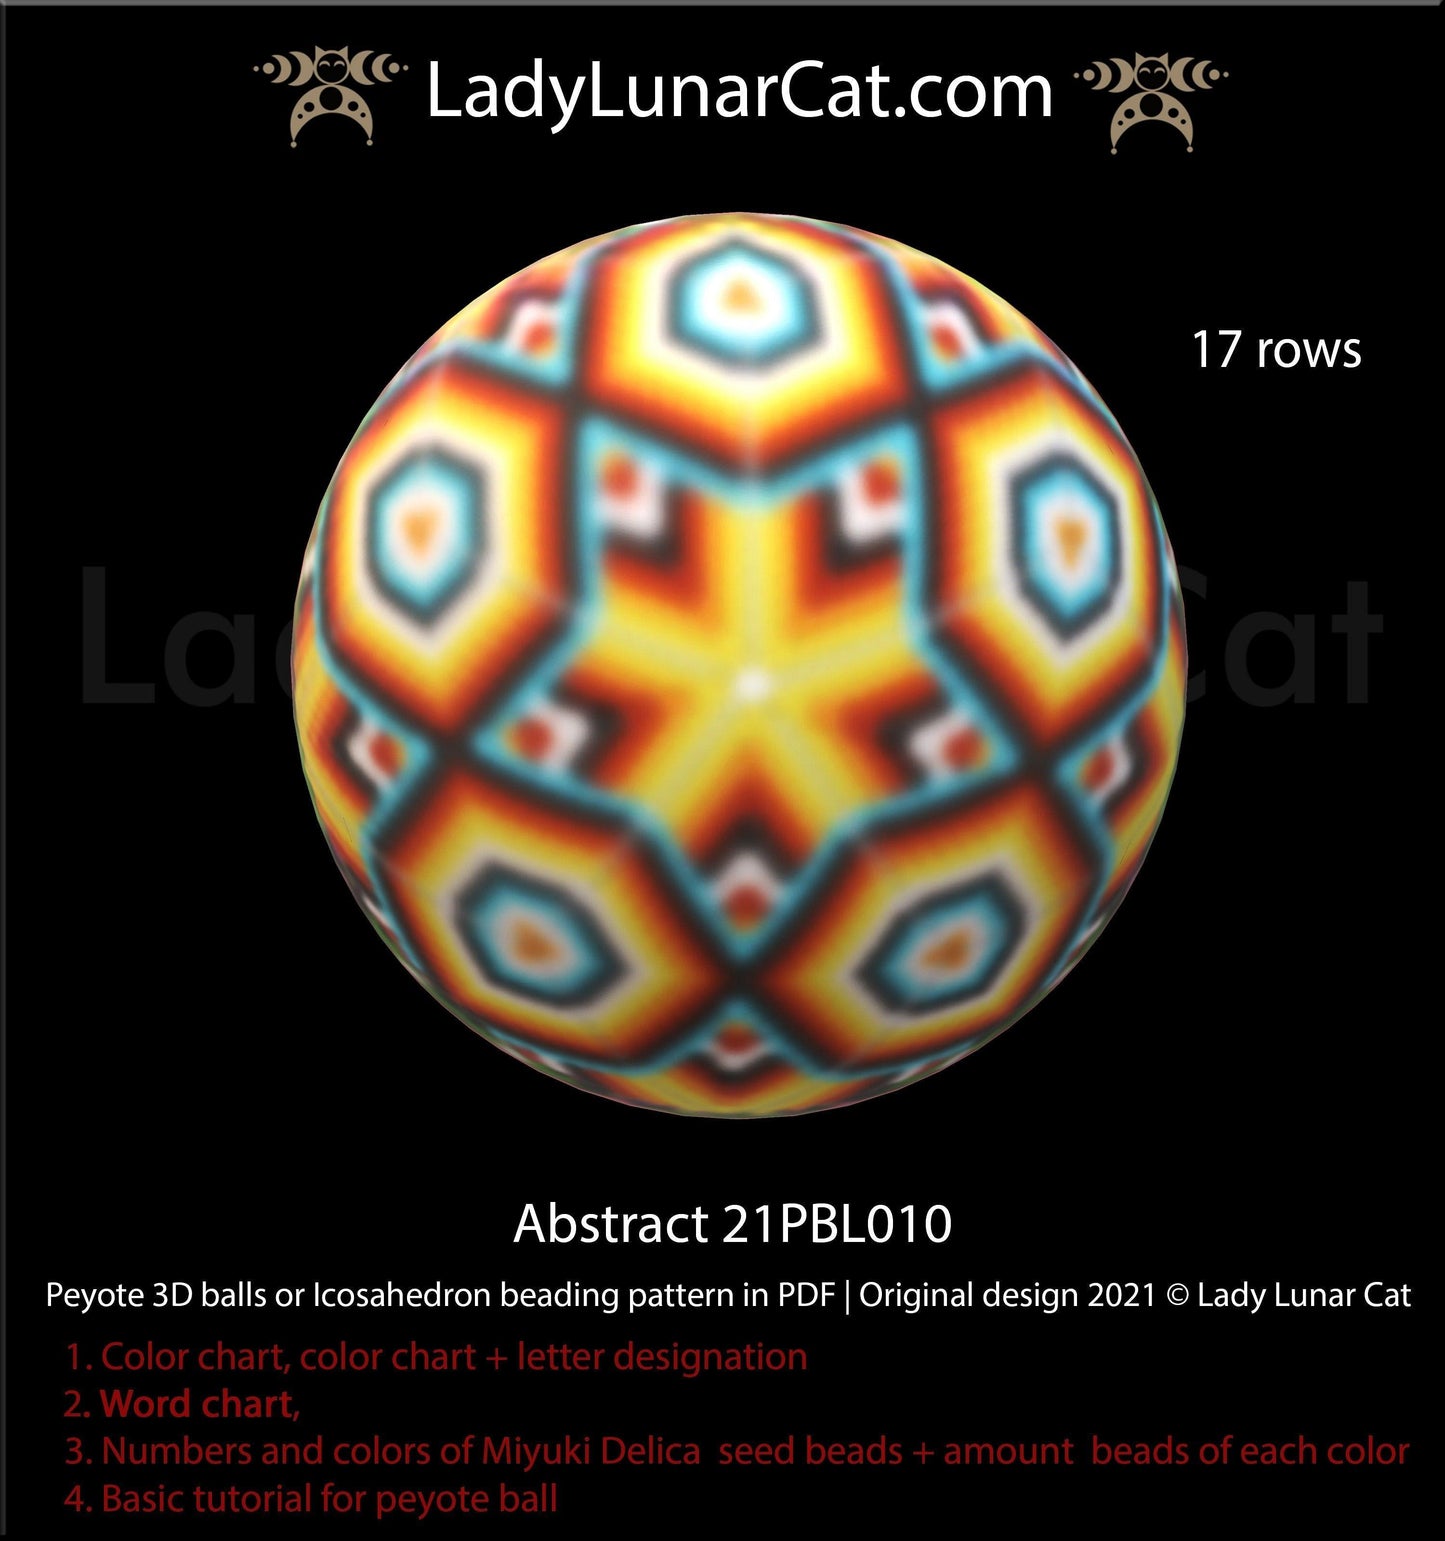 Peyote 3d ball pattern for beading | Beaded Icosahedron Abstract 21PBL010 17 rows LadyLunarCat